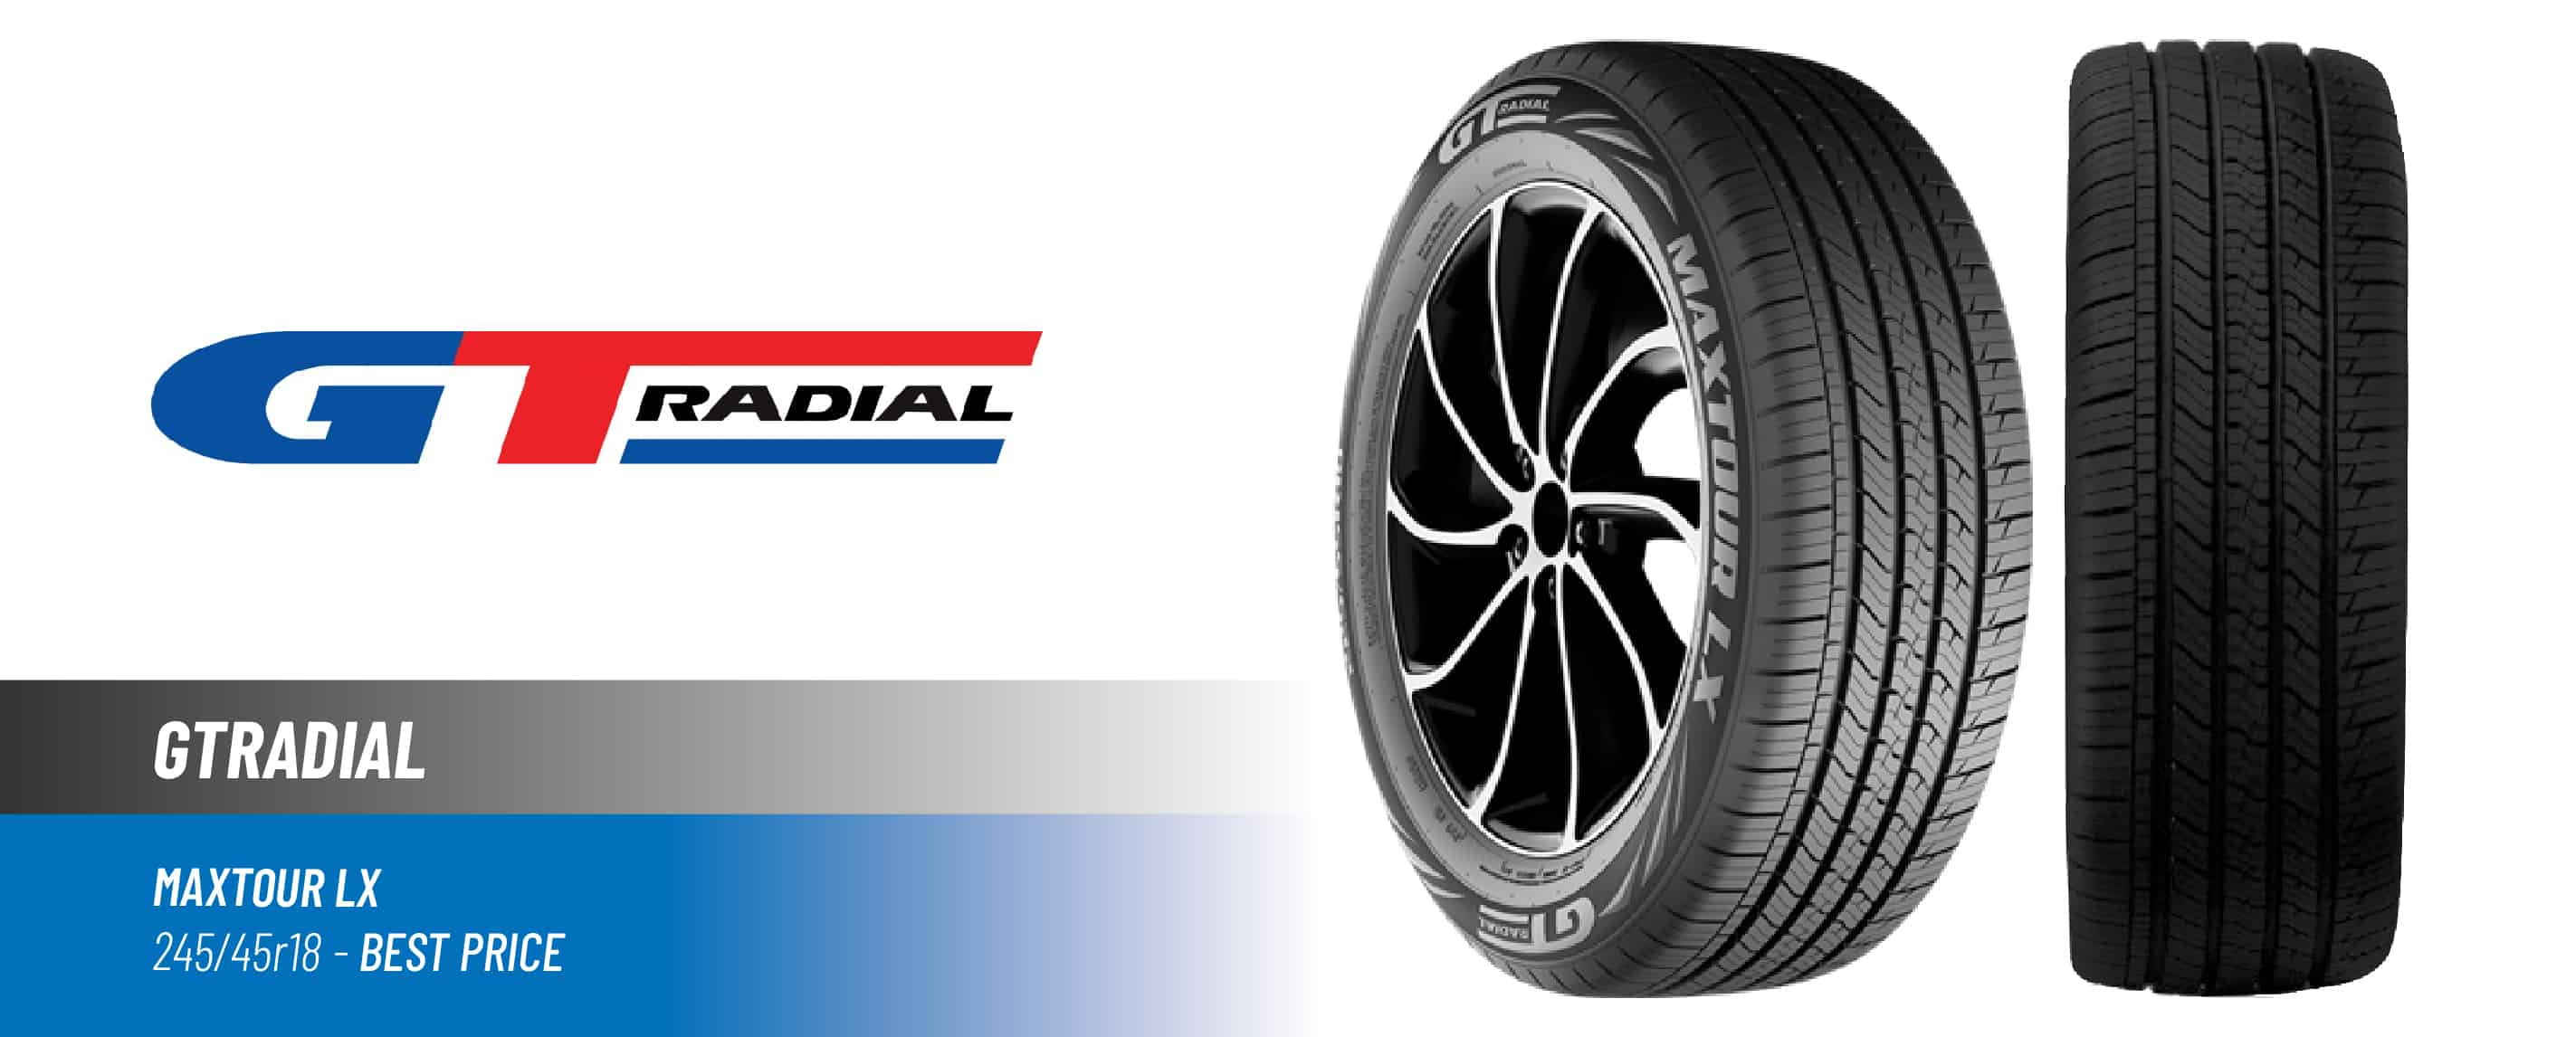 Top#3 Best Price: GTRadial Maxtour LX – 245 45r18